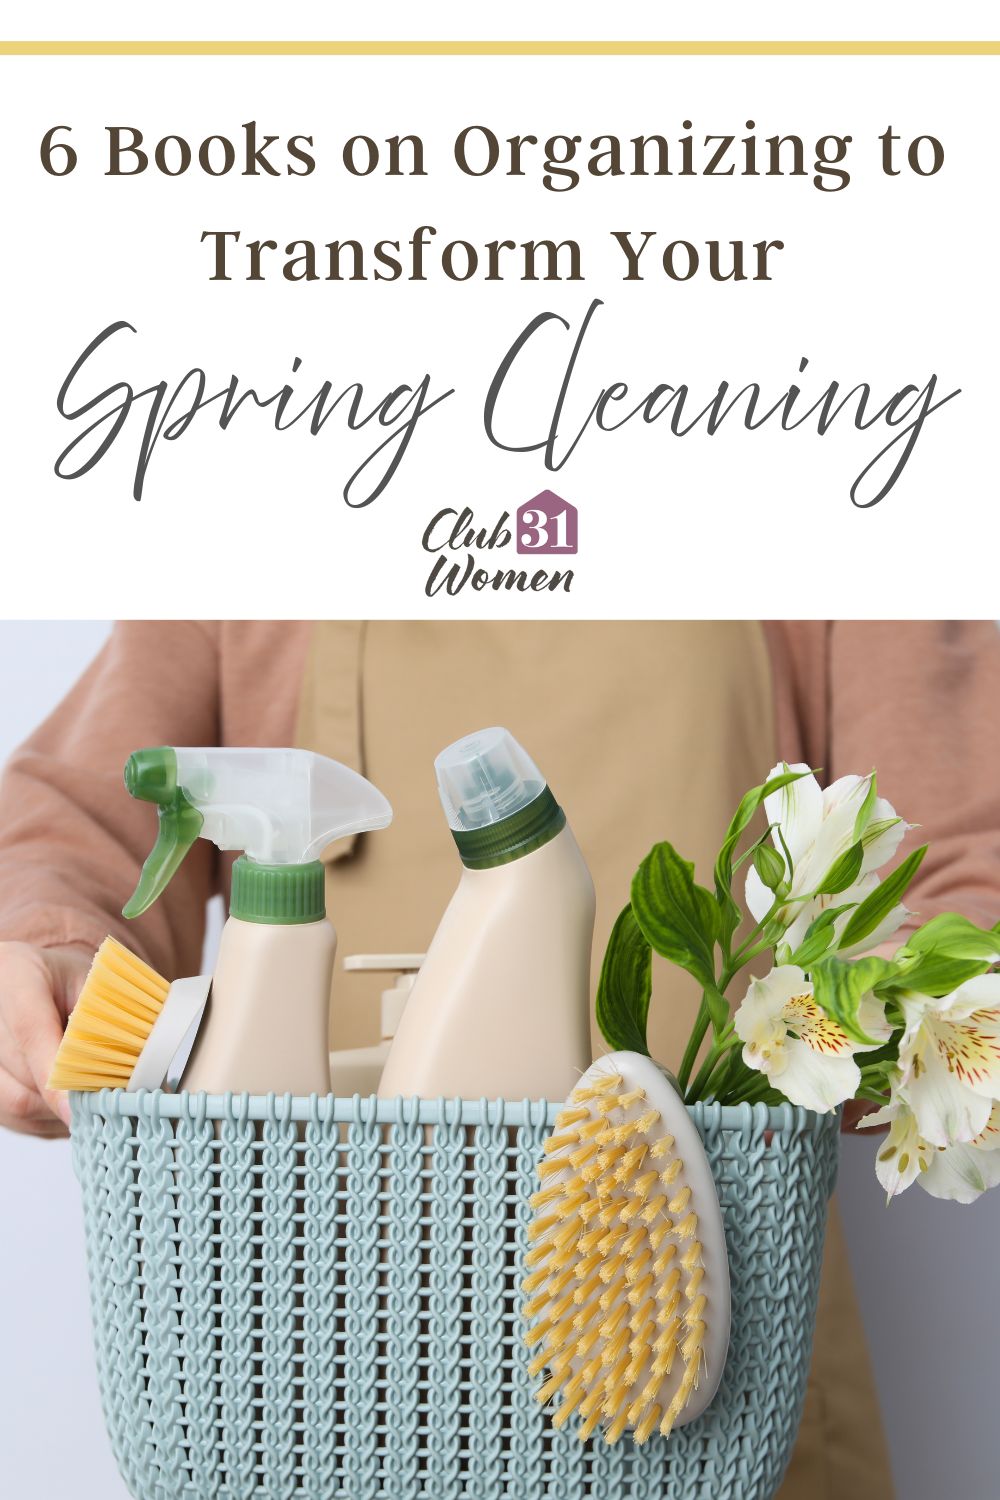 Now that spring is in full swing, we’ve got spring cleaning and organization on our minds! We’ve gathered 6 books to get your spring off to a great start.  via @Club31Women